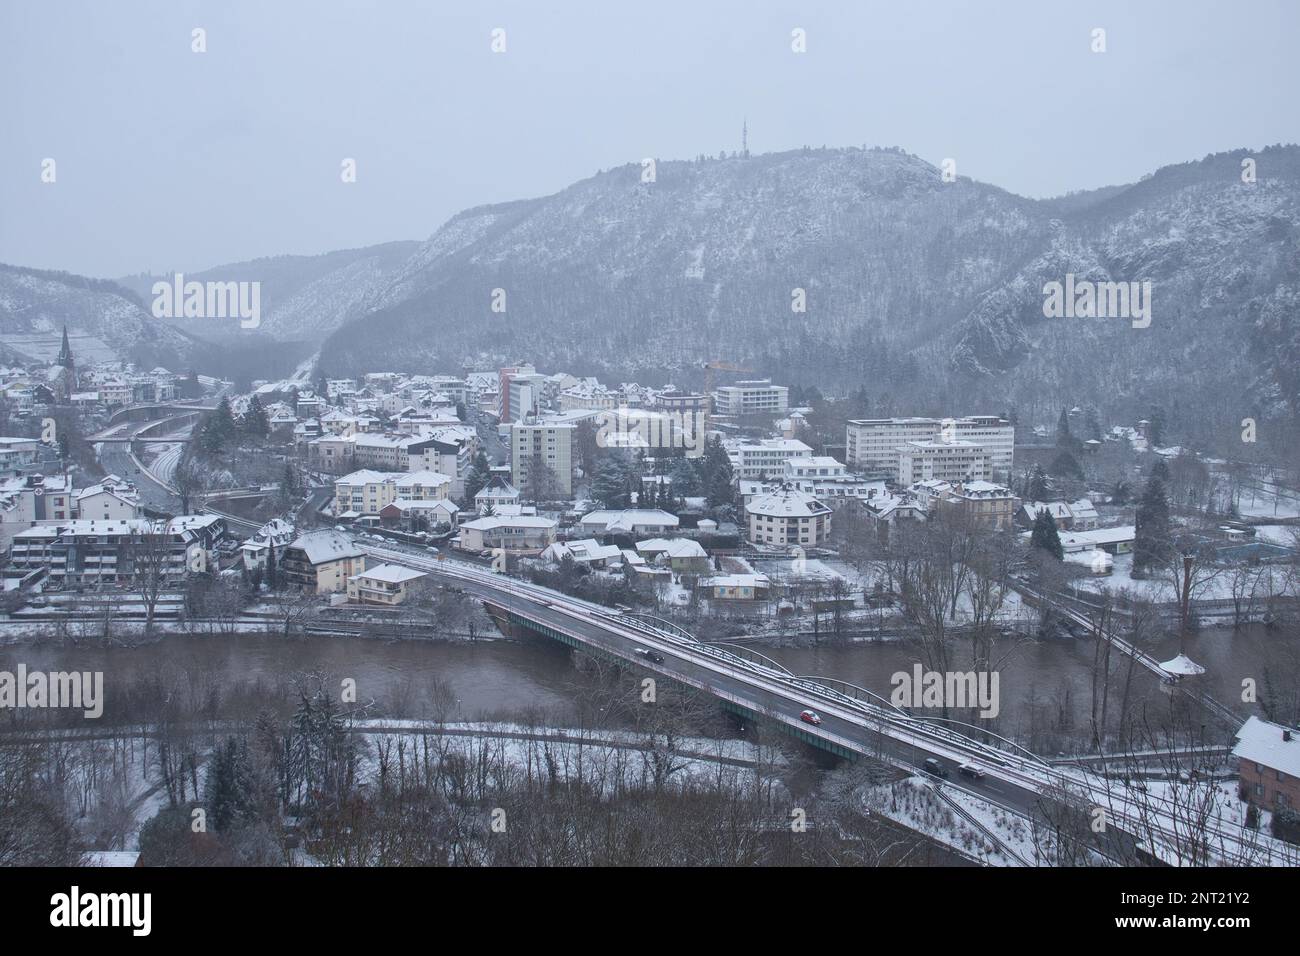 Bad Munster am Stein-Ebernburg, Germany - Febryary 8, 2021: Bridge over the Nahe river in Bad Munster with Rotenfels in the background on a snowy, fog Stock Photo